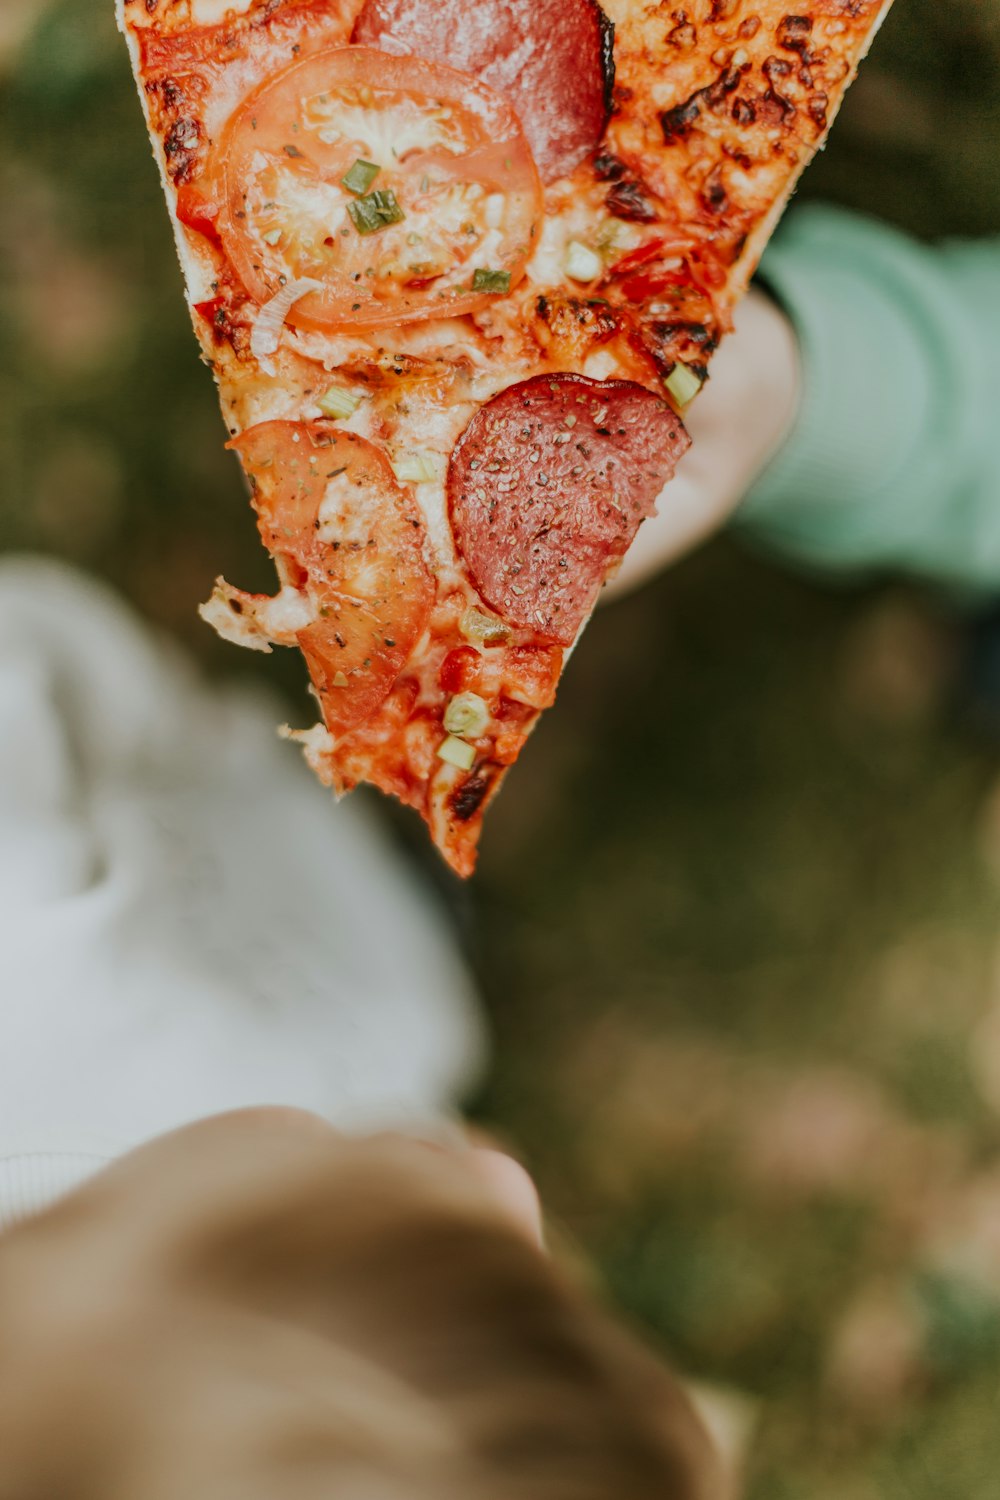 tomato and pepperoni pizza with cheese in selective focus photography